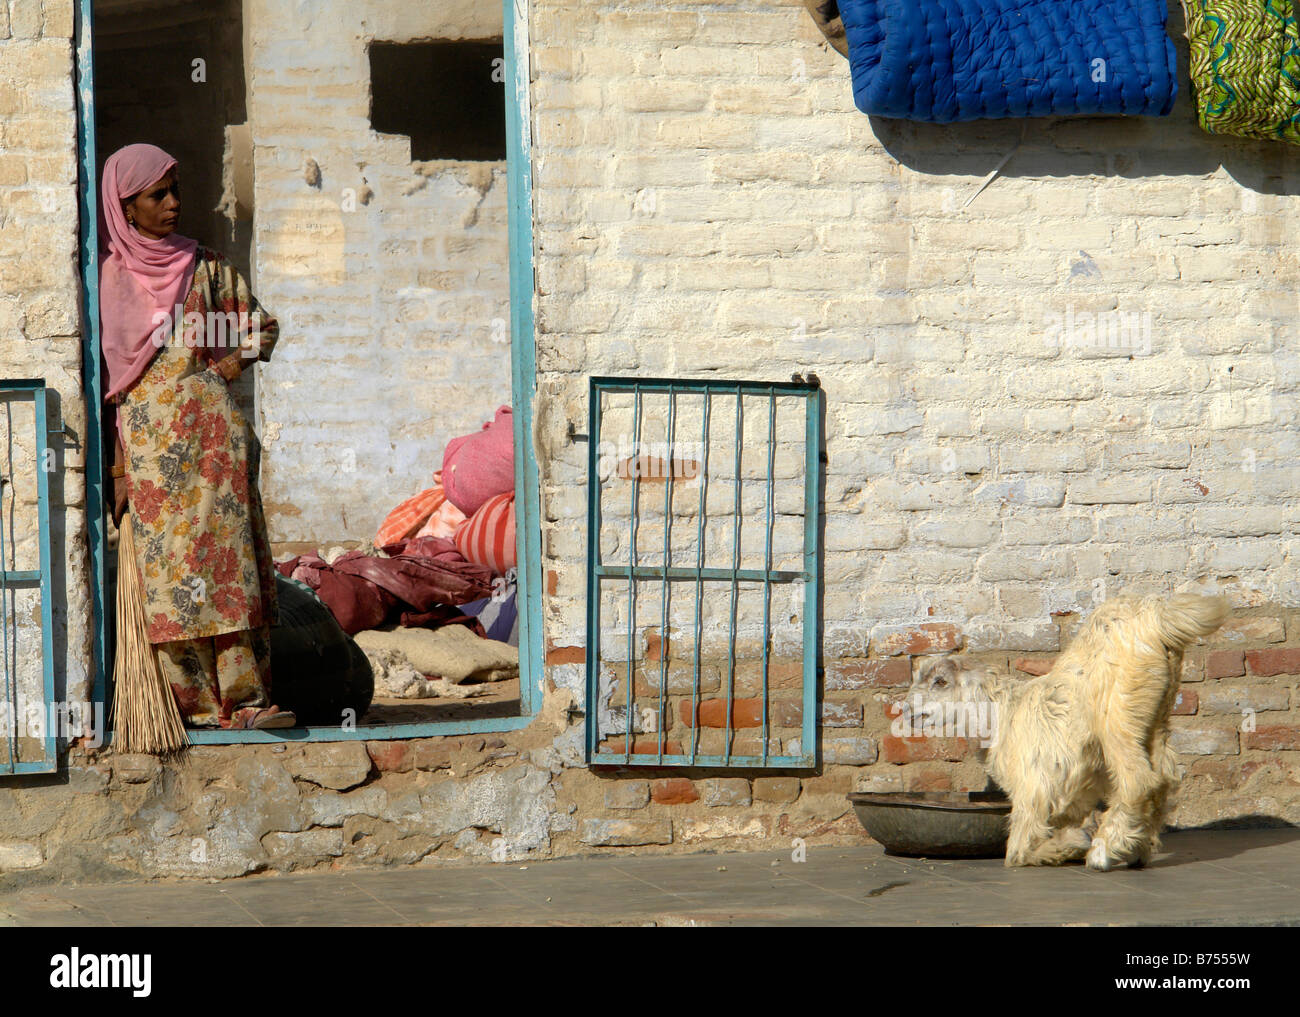 indian woman in doorway of typical bikaner old town back street house with goat Stock Photo